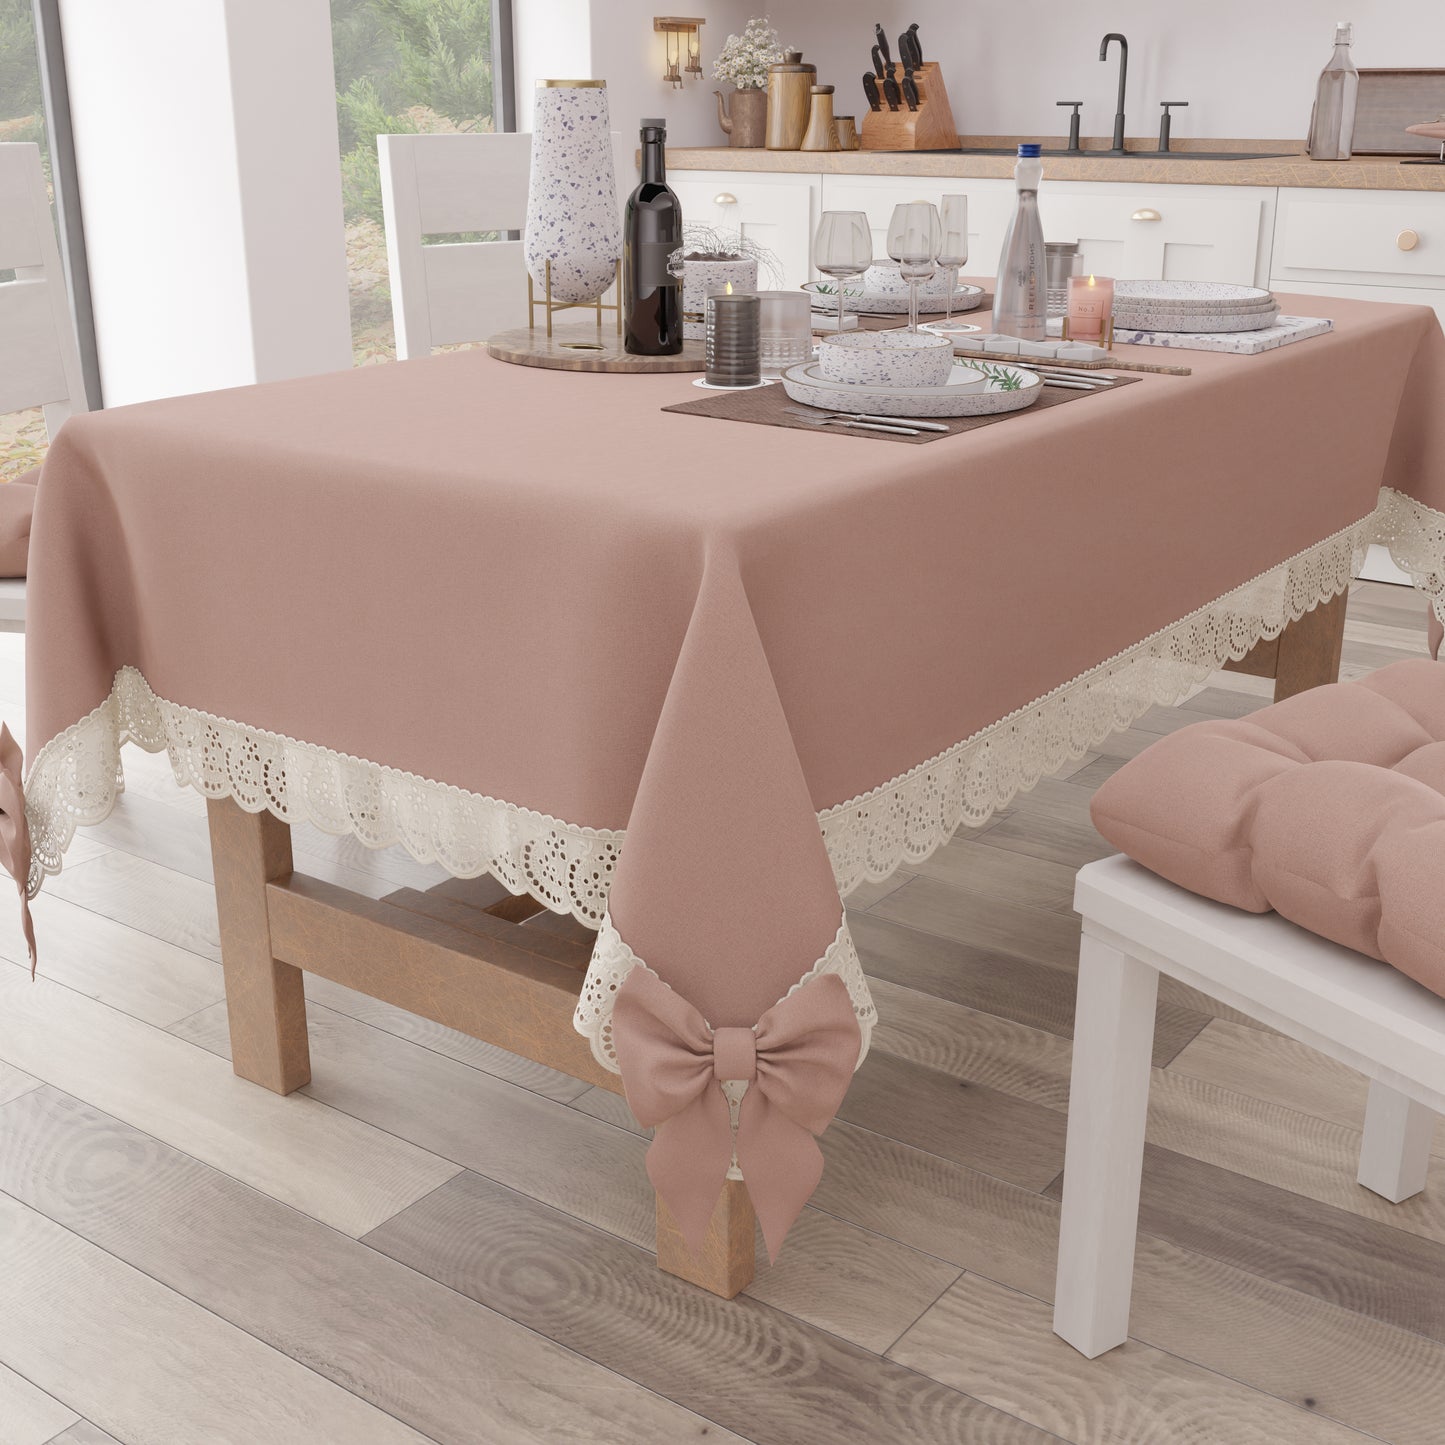 Shabby Chic Tablecloth Table Cover with Lace and Powder Pink Bows 